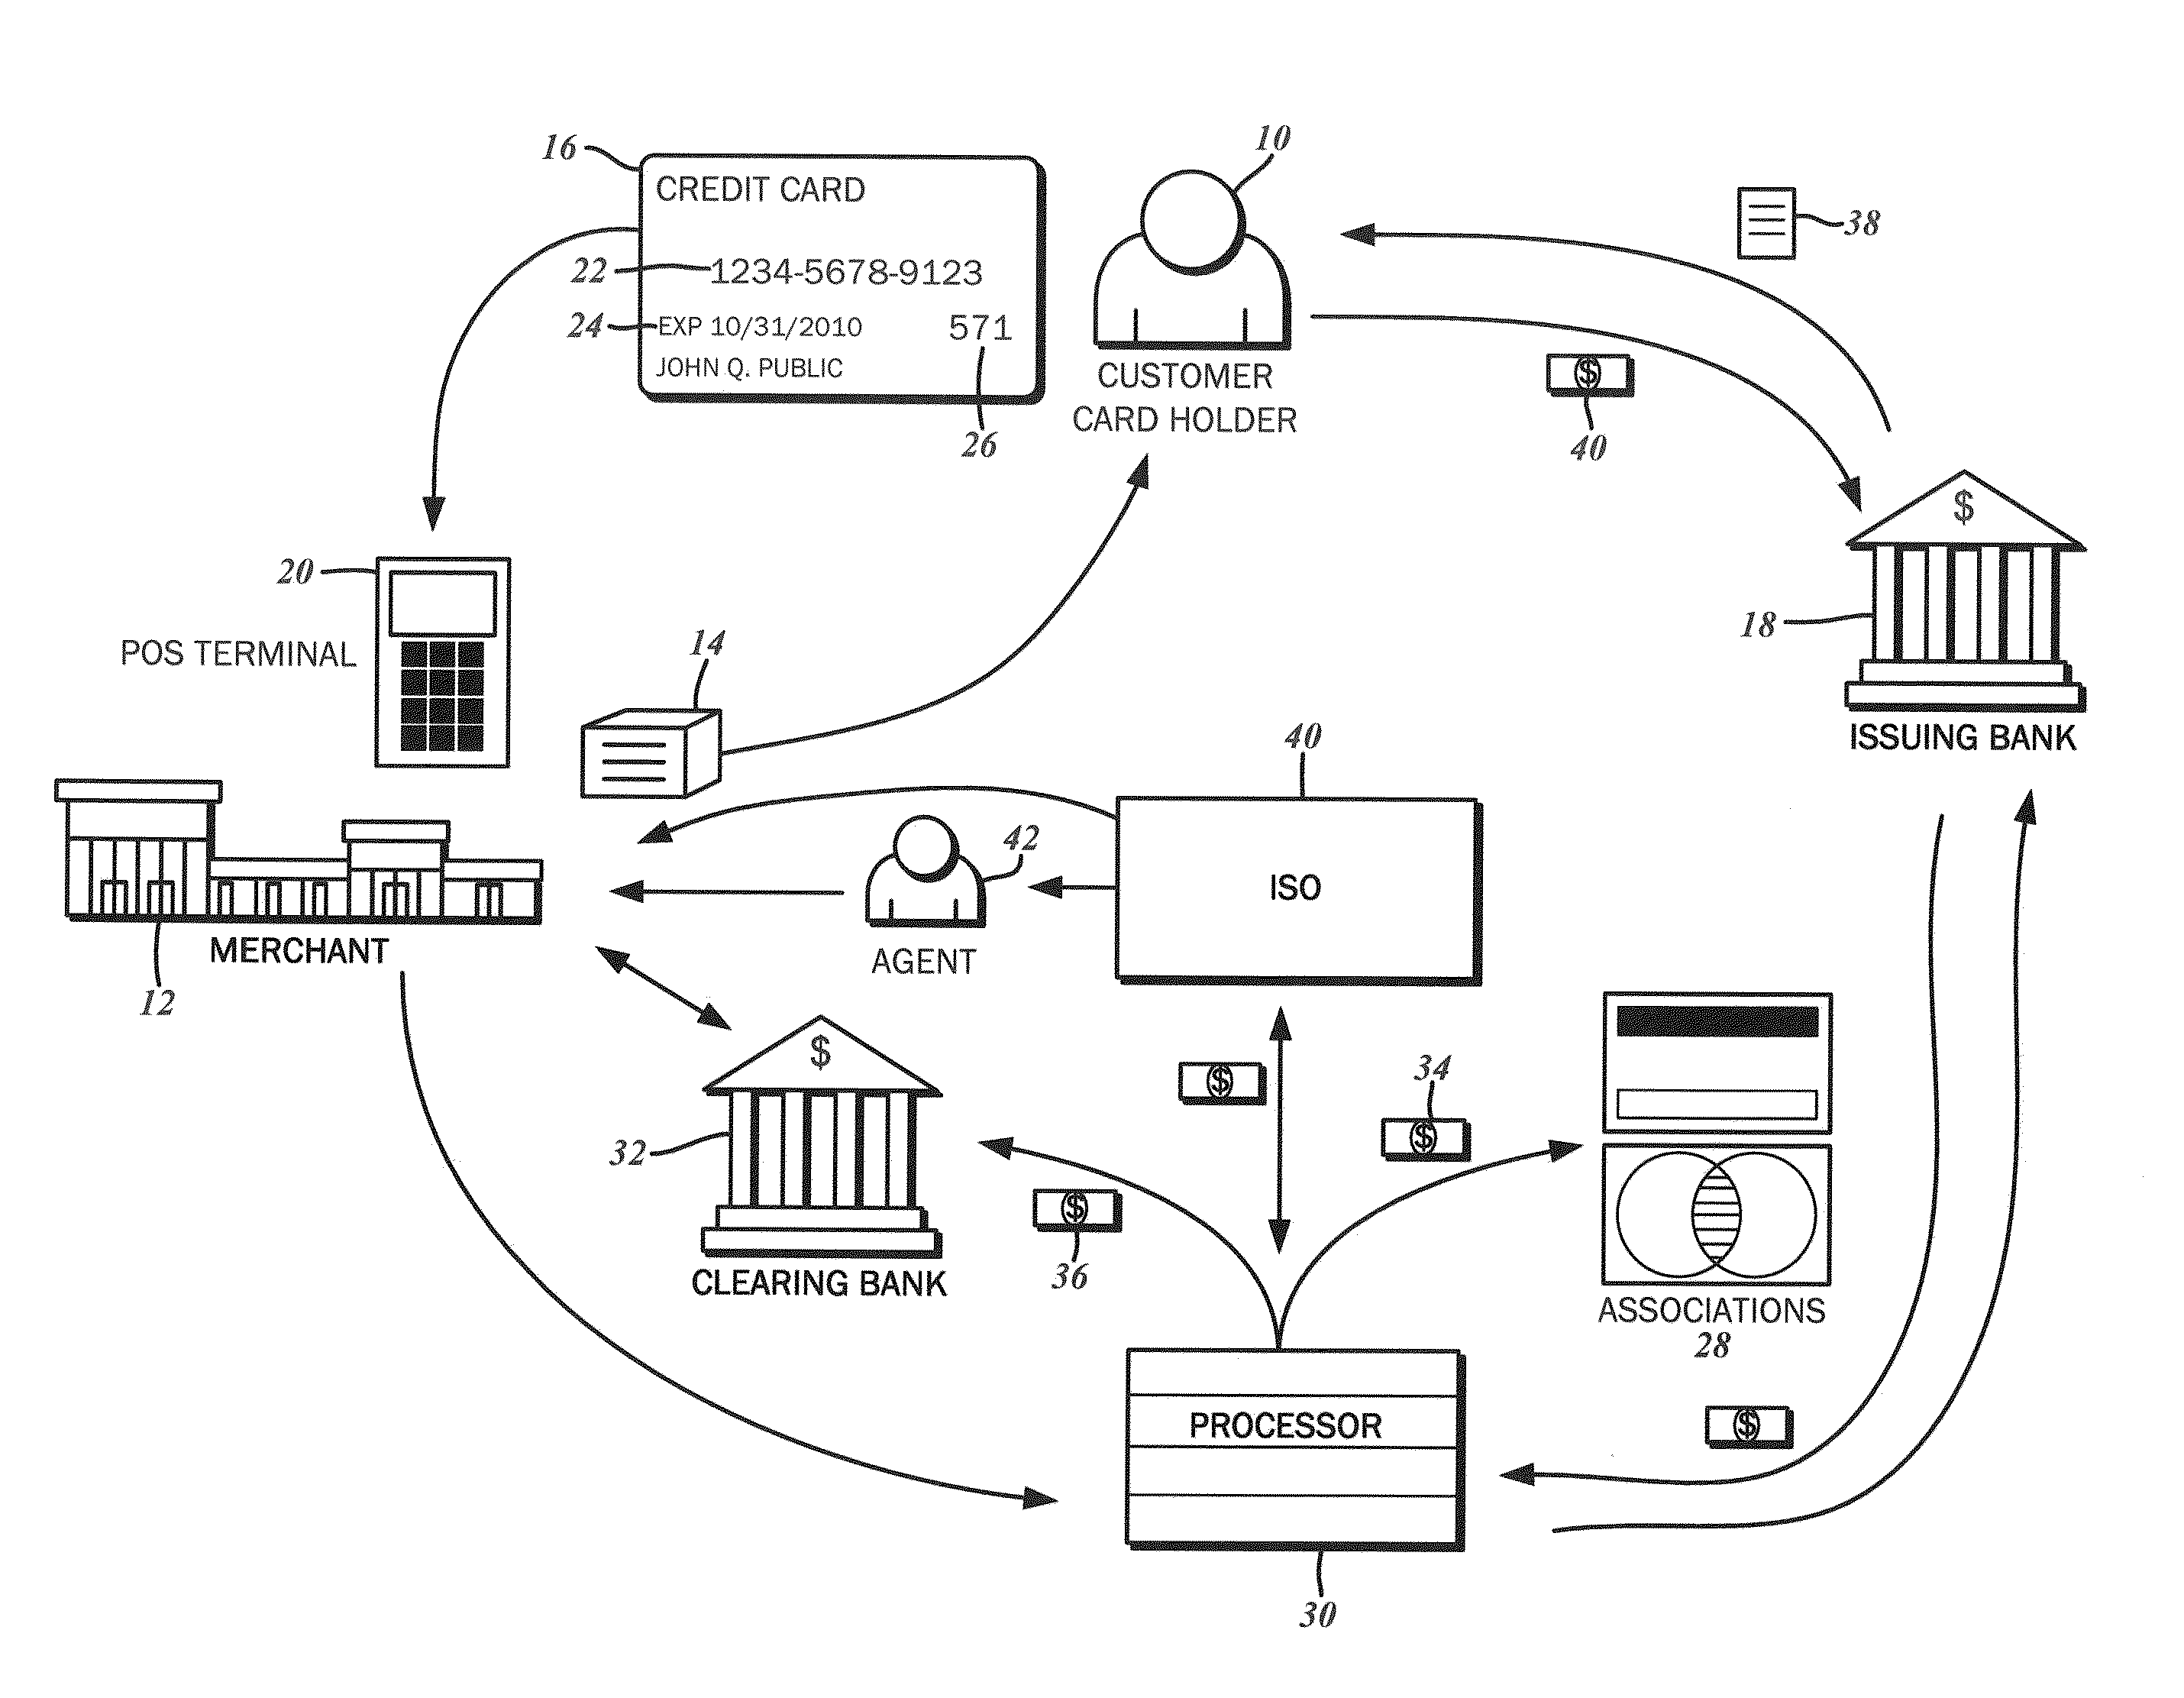 Subscription and membership based credit card processing system